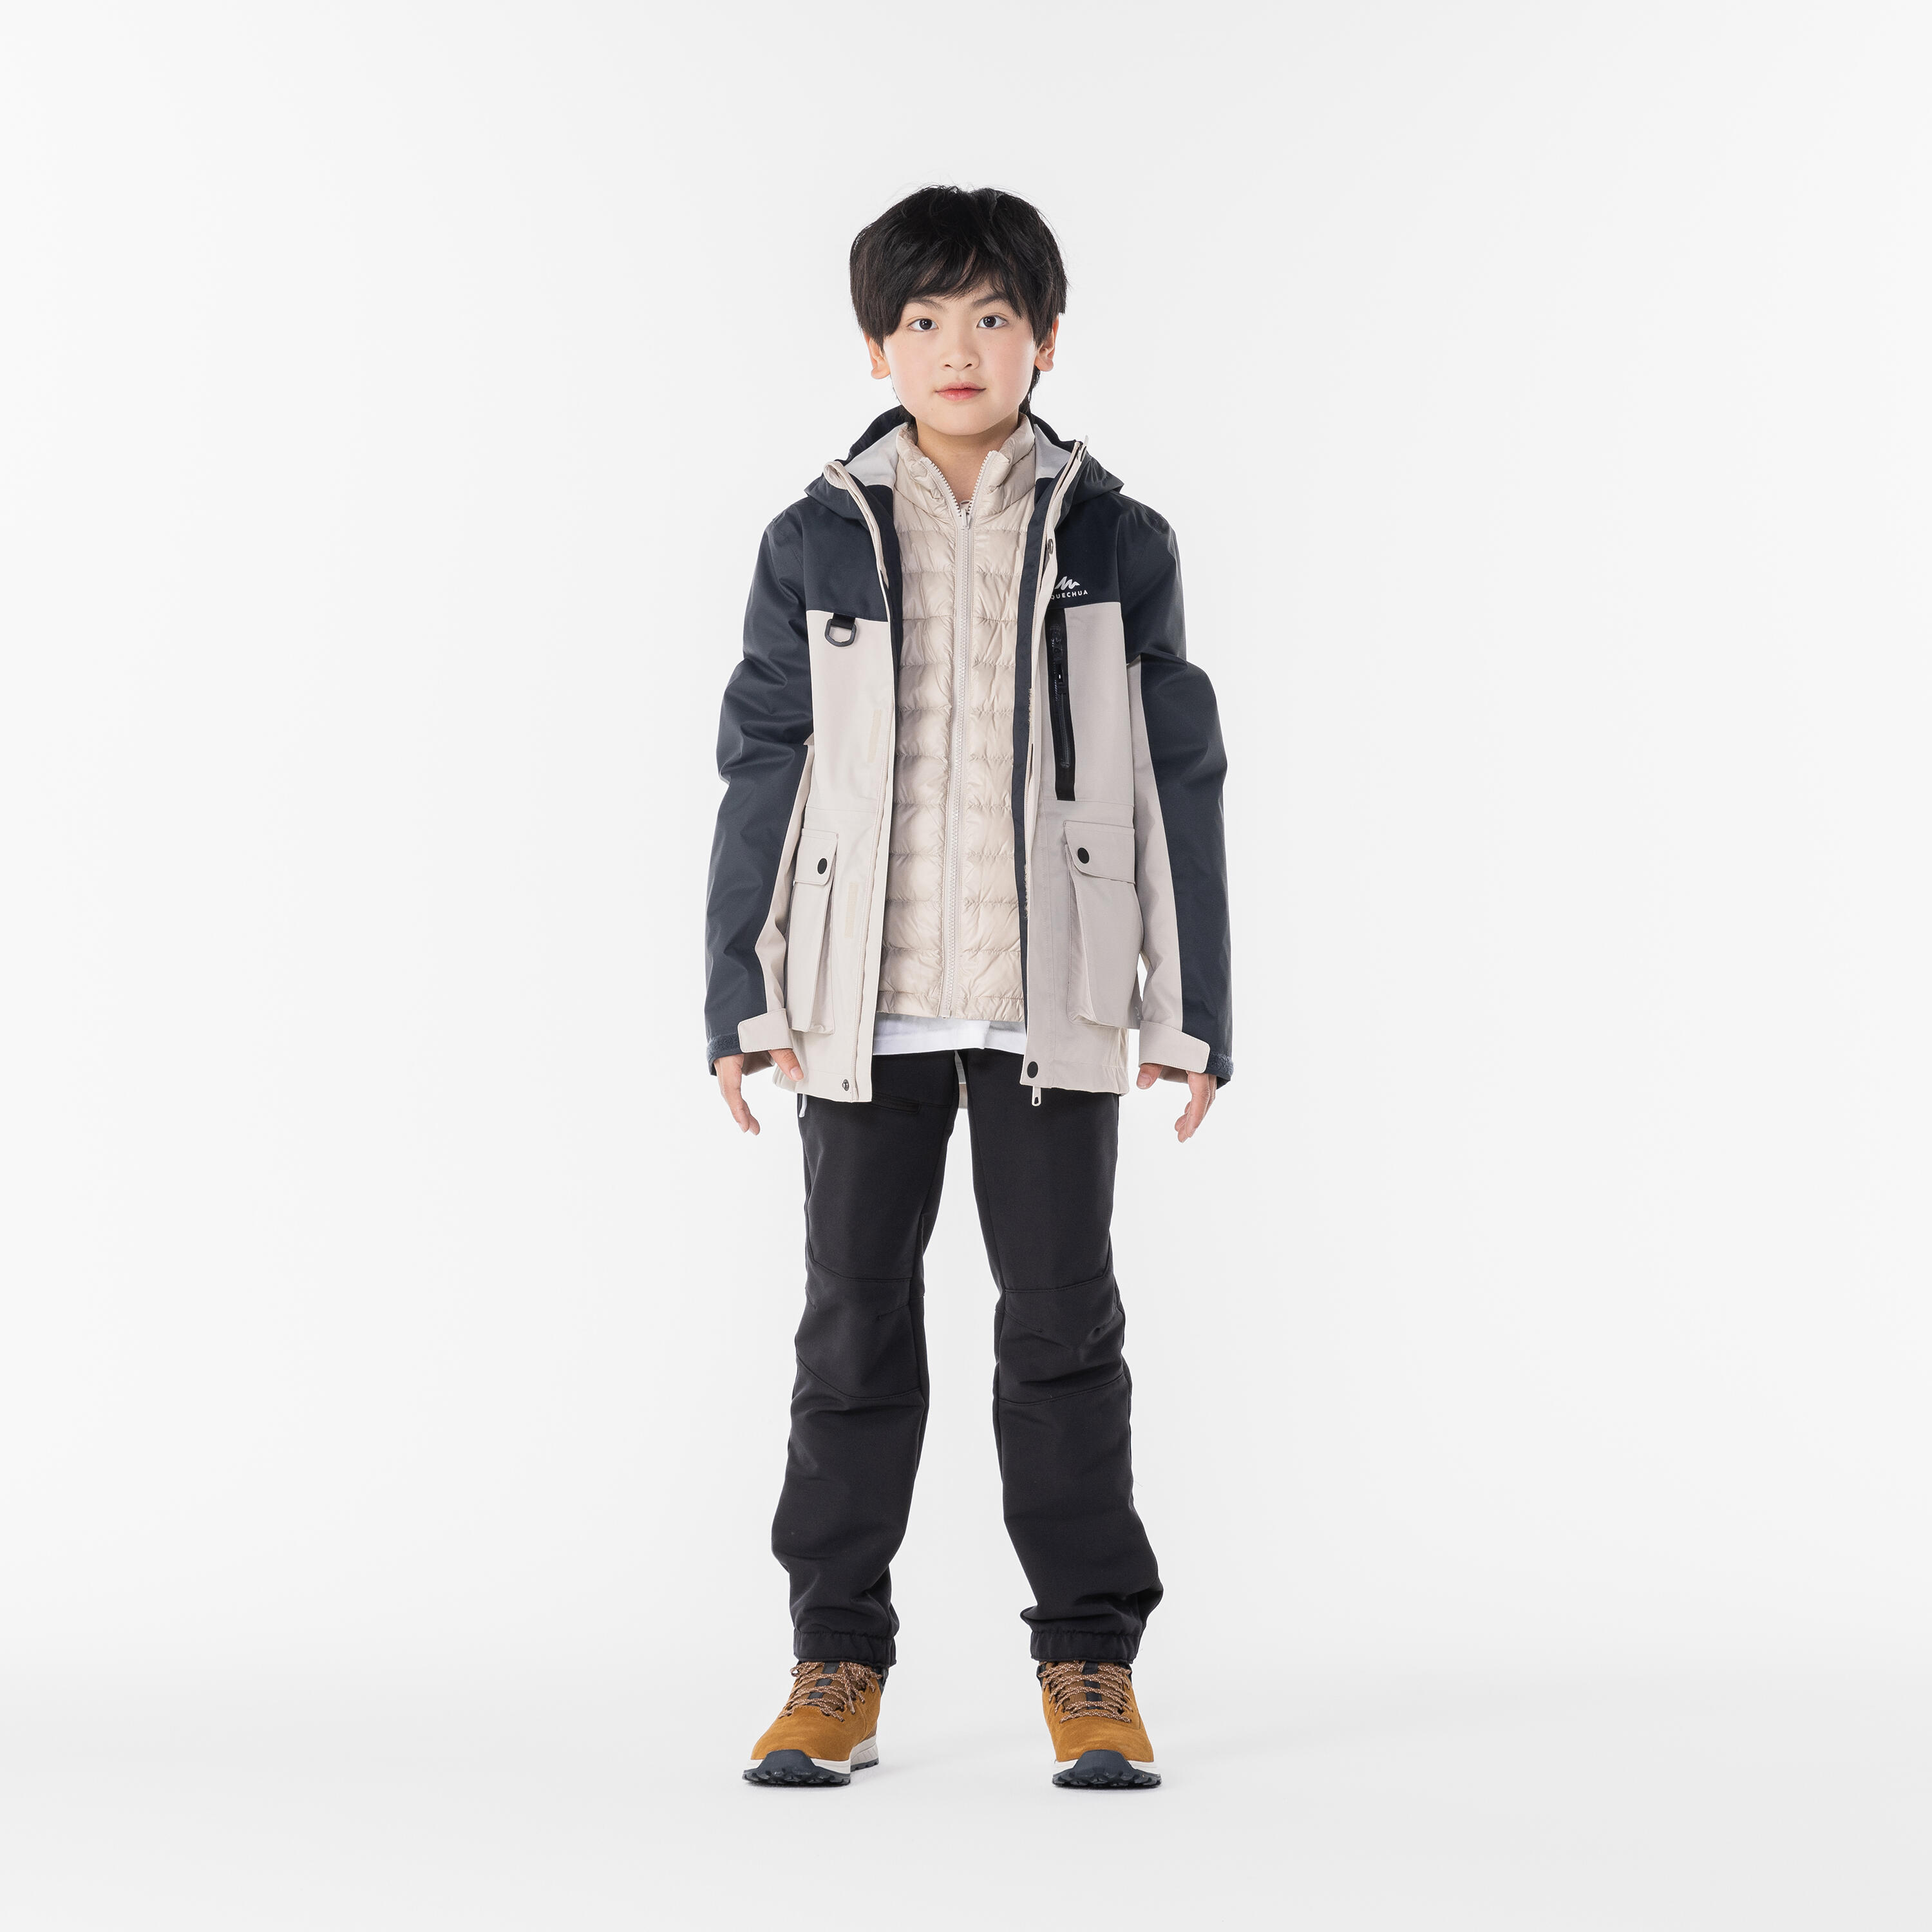 Kids’ Warm Hiking Softshell Trousers - SH500 Mountain - Ages 7-15 14/18